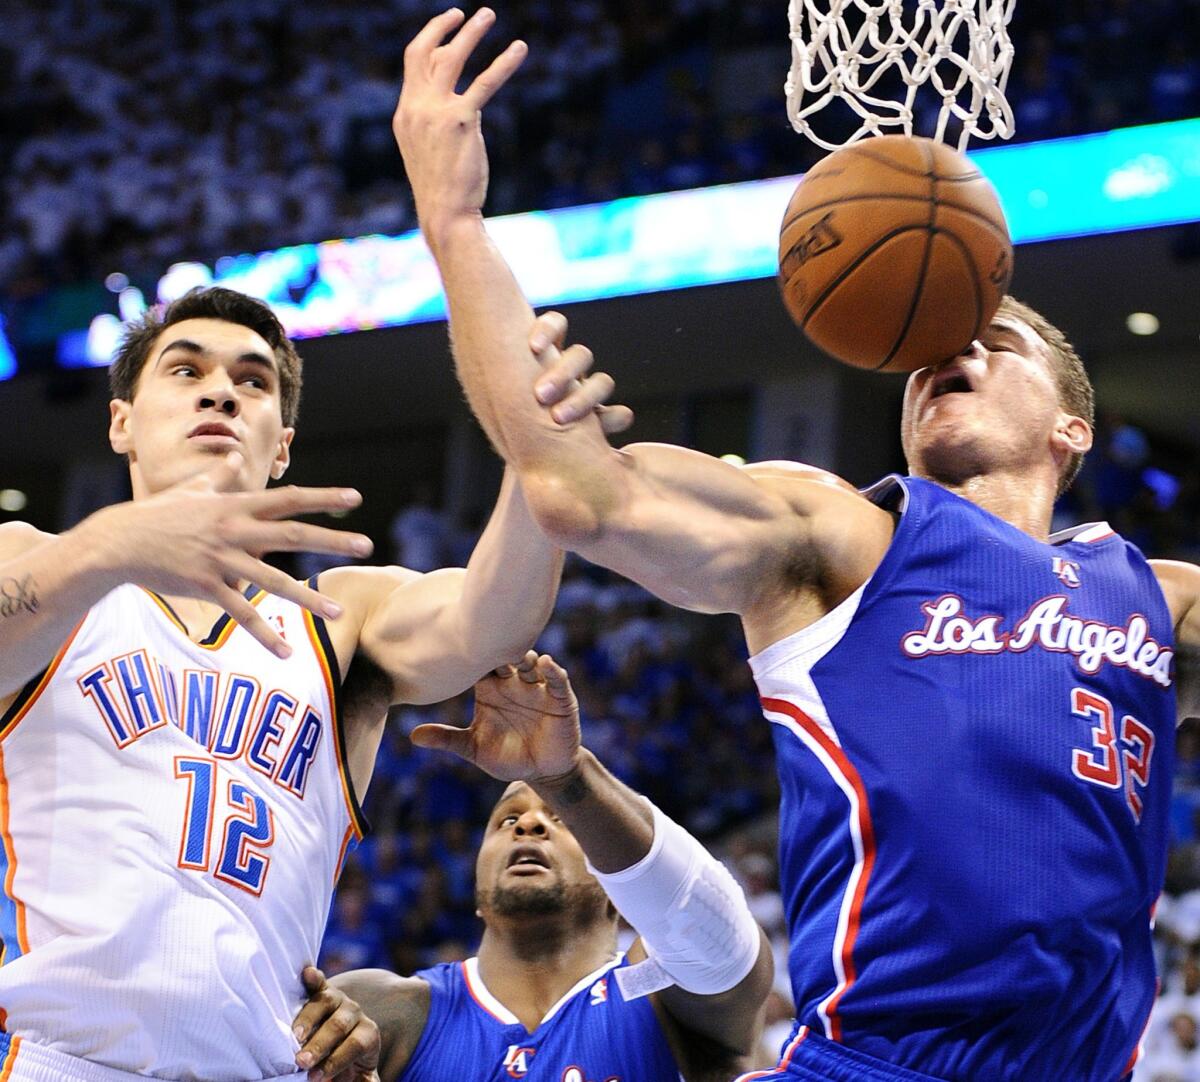 The Clippers' Blake Griffin battles Oklahoma City's Steven Adams and the ball in Game 2 of their playoff.